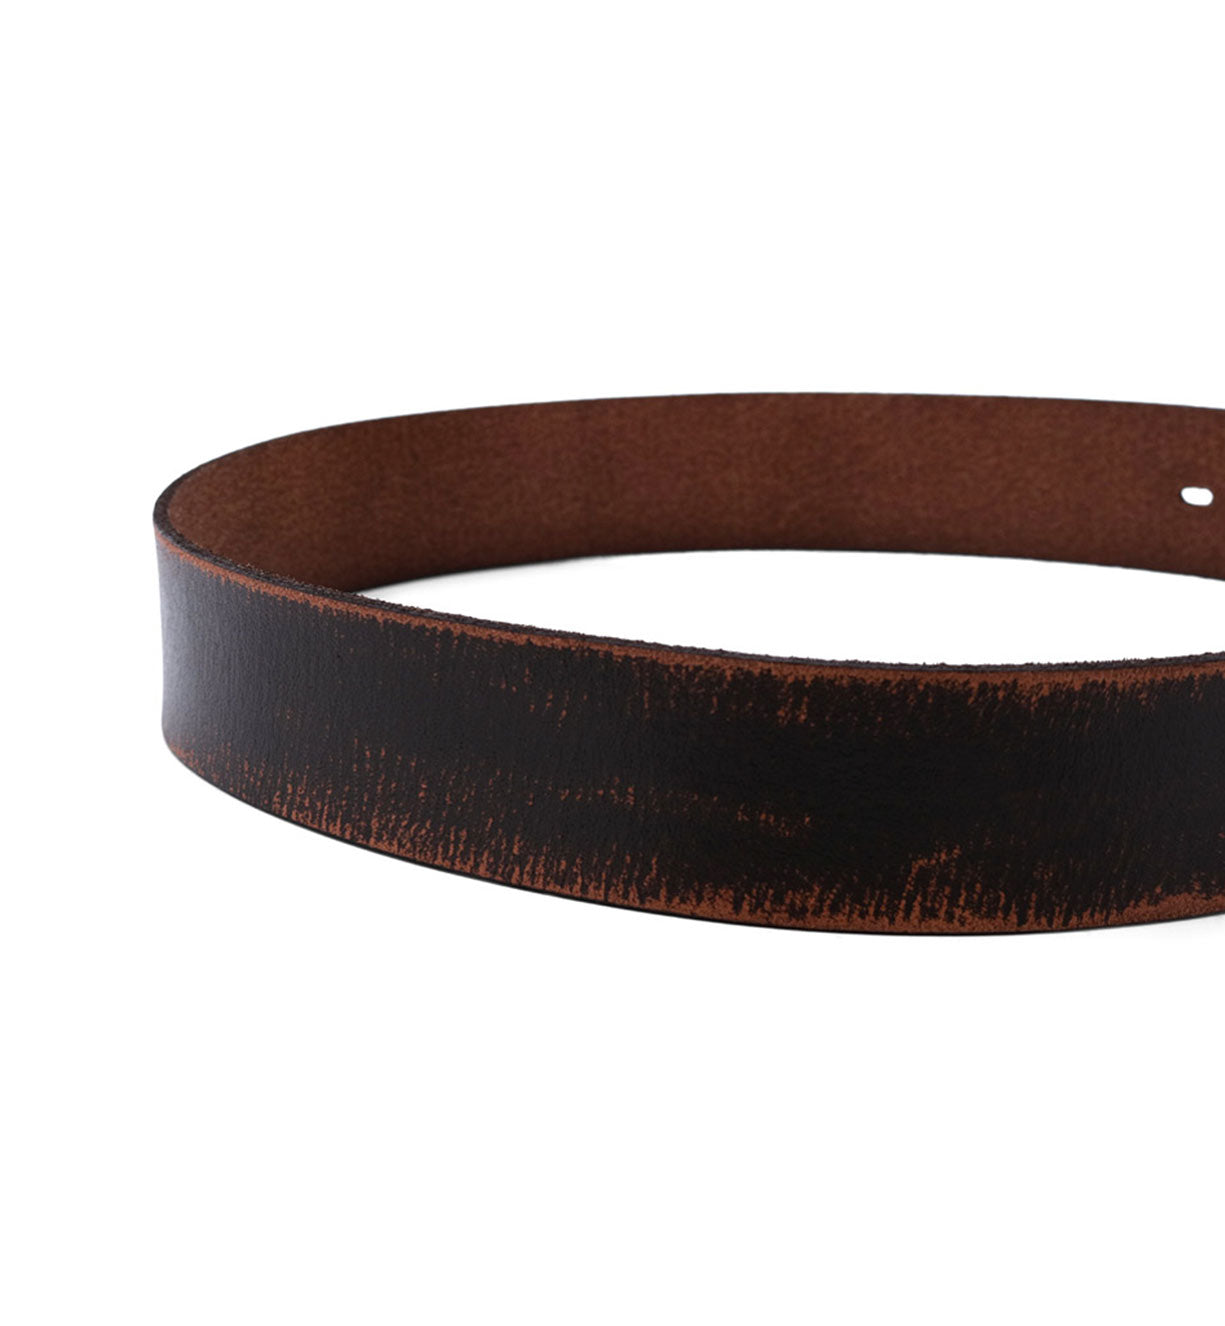 A black and brown Hobo leather belt on a white background by Bed Stu